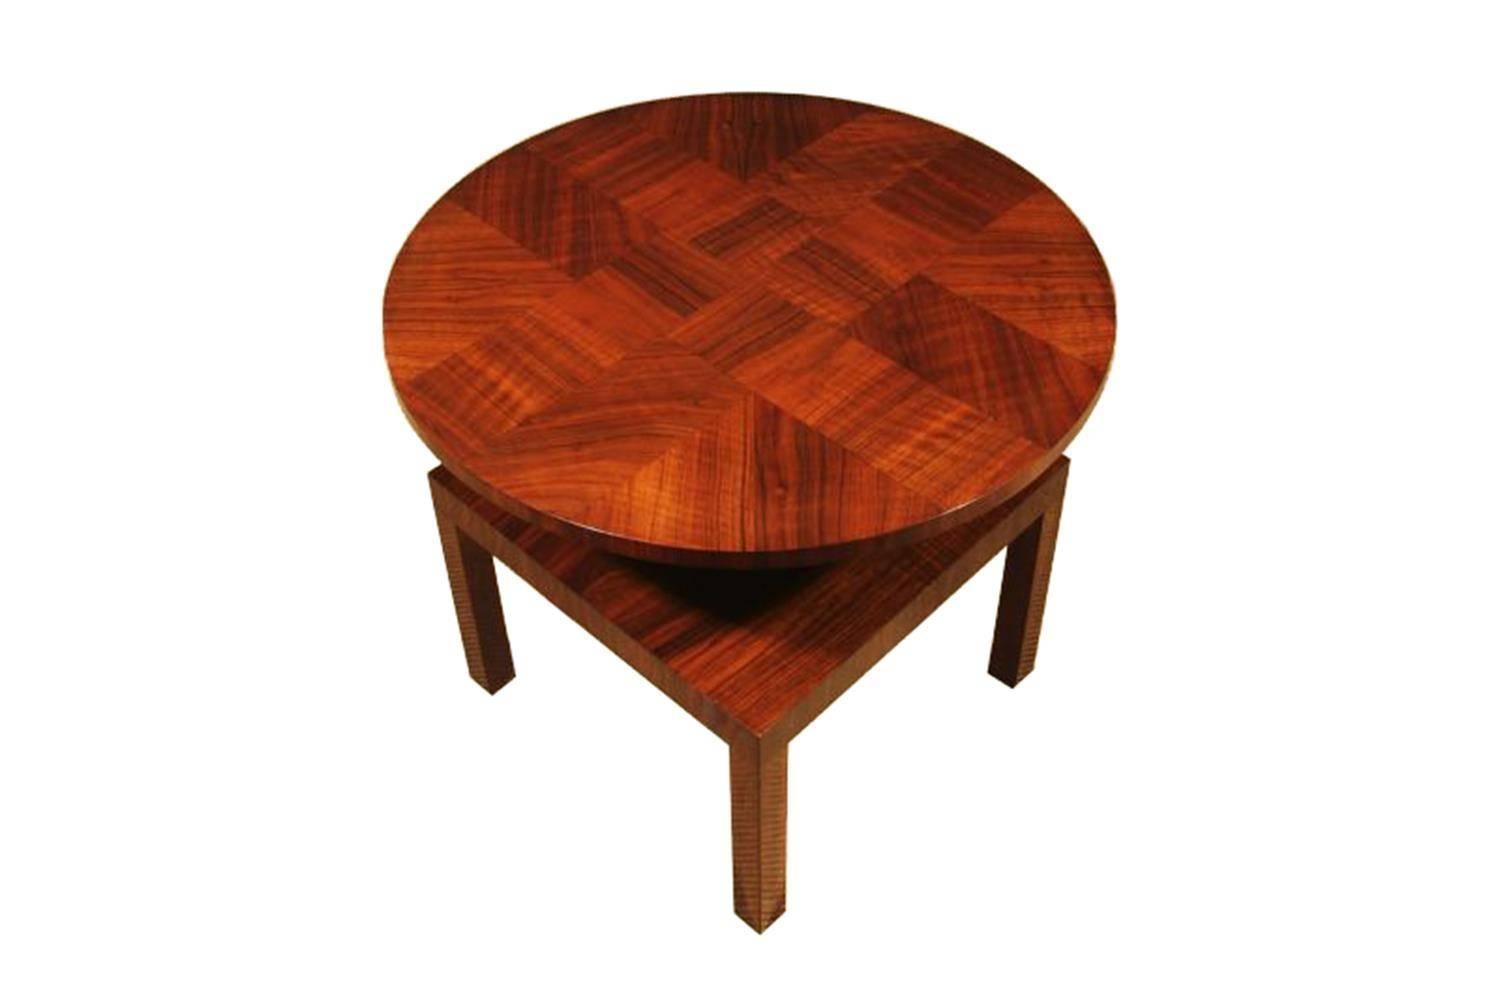 Hand-Crafted Vintage Art Deco Side Table Made of Mahogany and Walnut